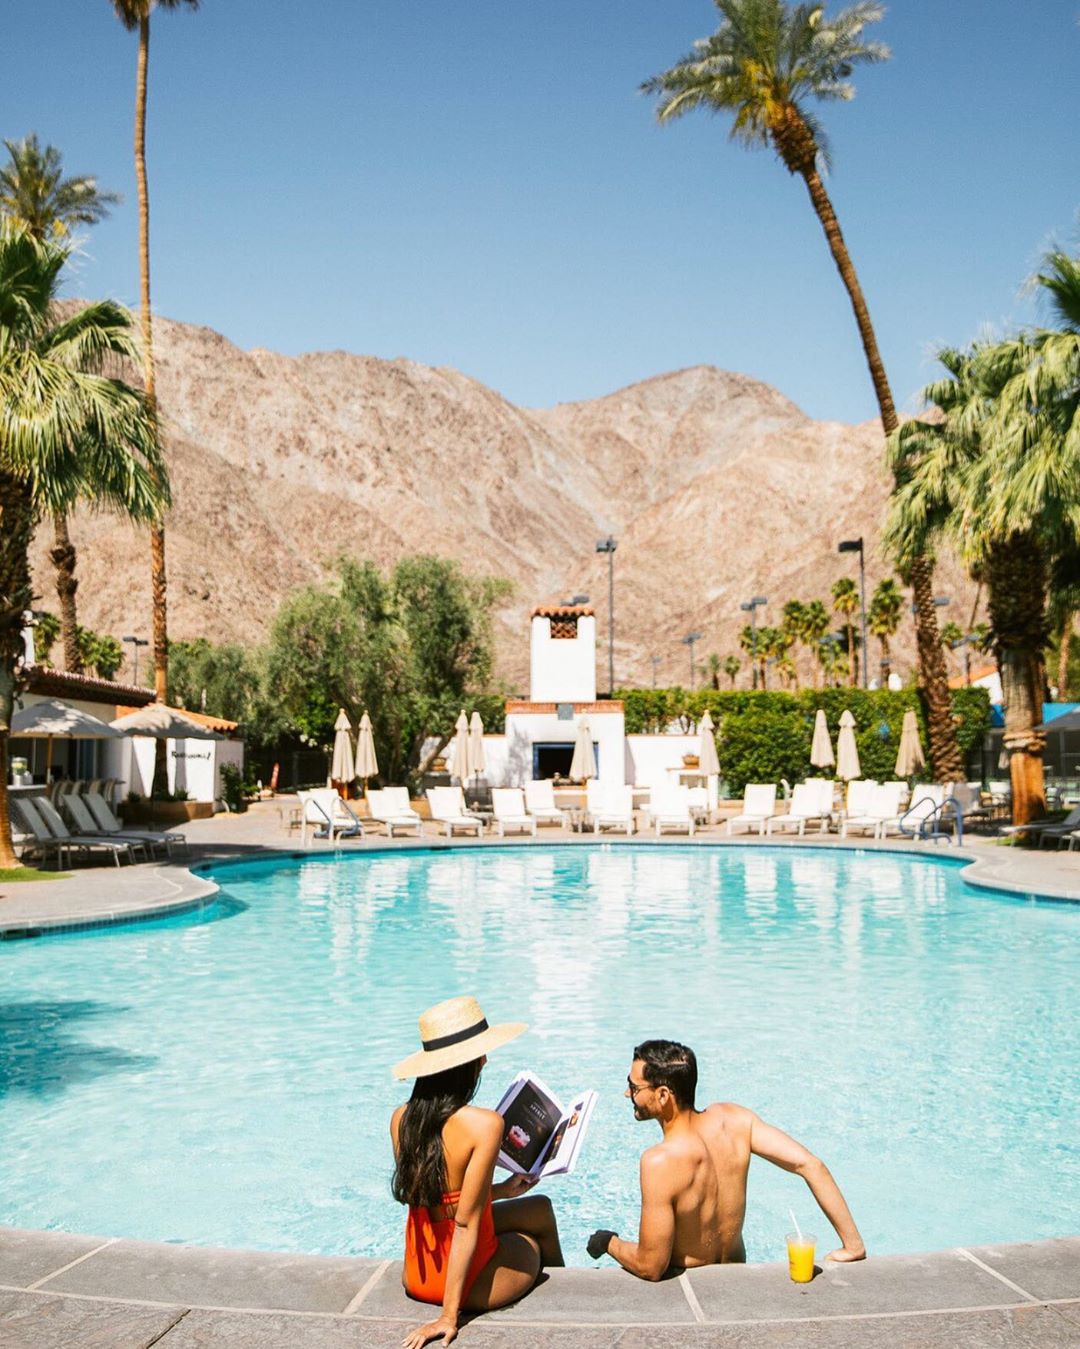 Man and woman sitting by pool with mountains in background. Photo by Instagram user @laquintaresort